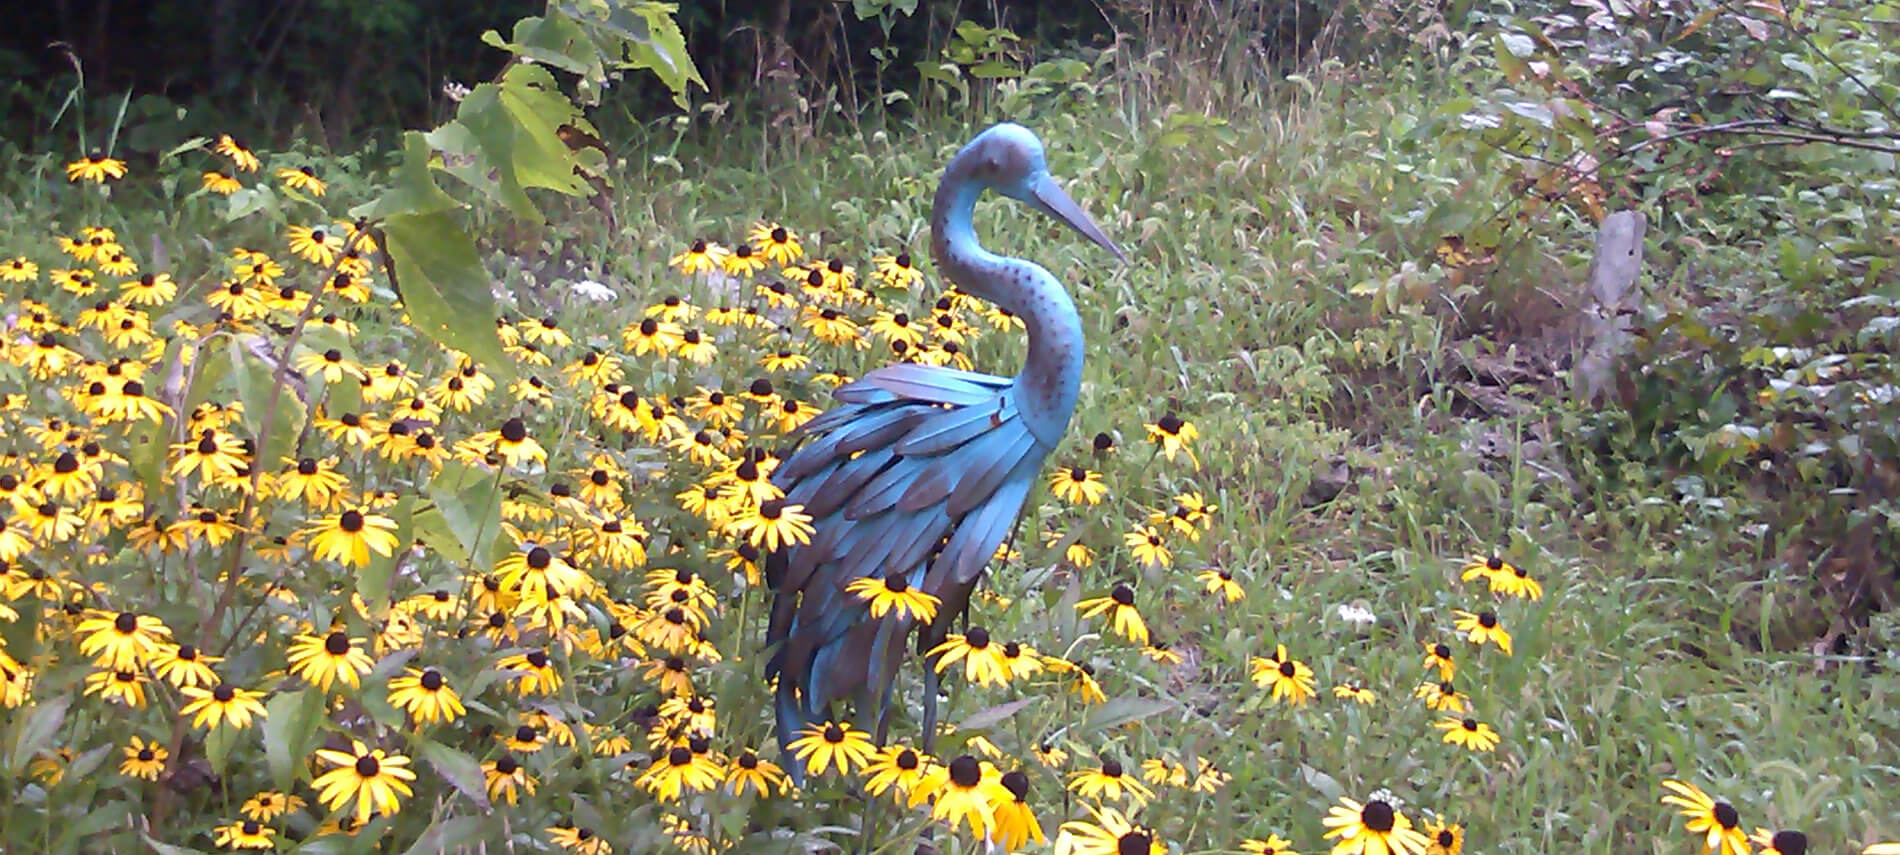 A beautiful statue of a blue heron bird standing in a meadow of yellow daisies.